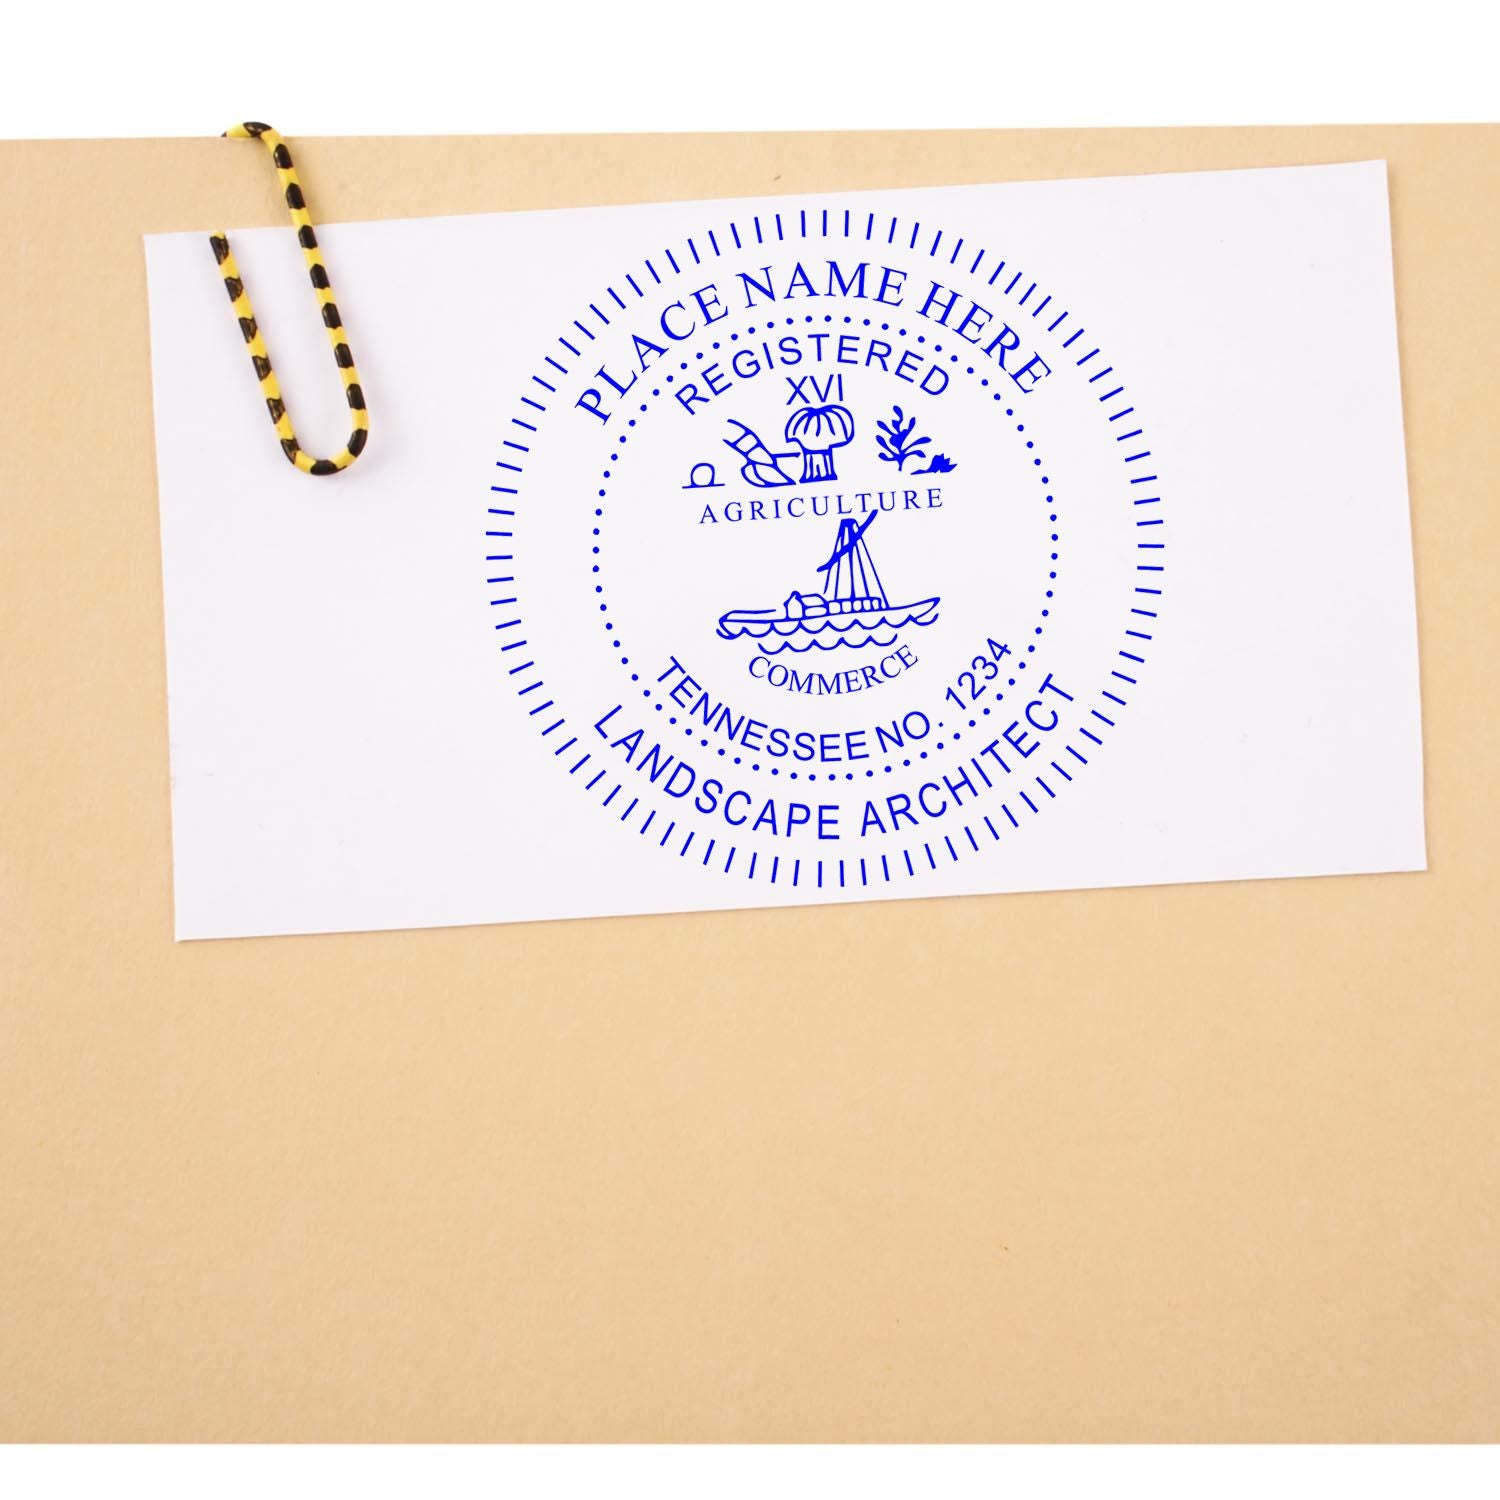 The Premium MaxLight Pre-Inked Tennessee Landscape Architectural Stamp stamp impression comes to life with a crisp, detailed photo on paper - showcasing true professional quality.